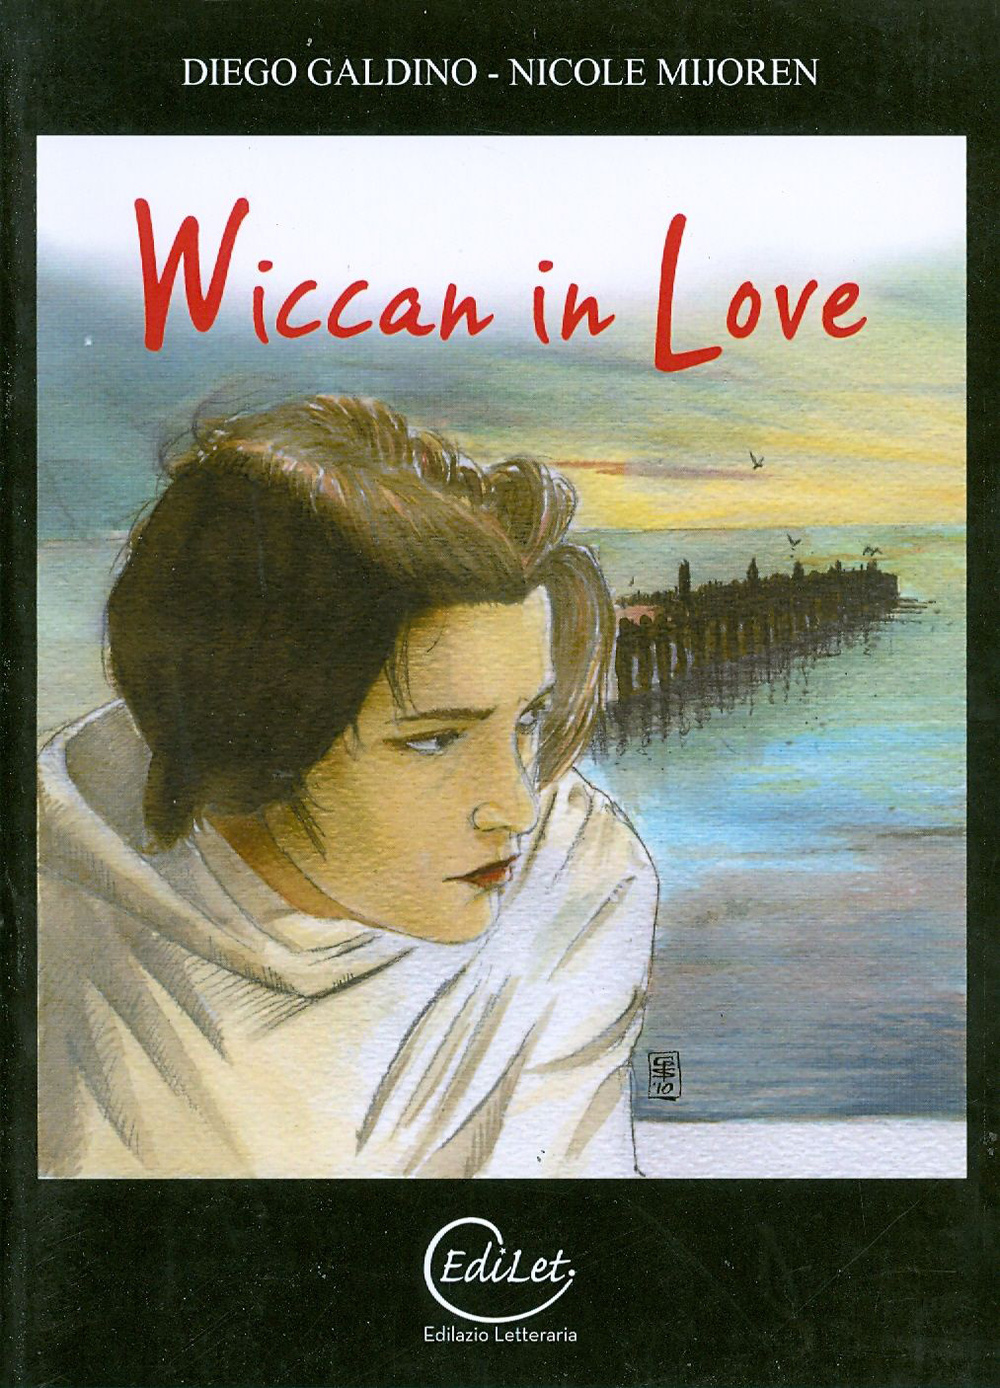 Wiccan in love